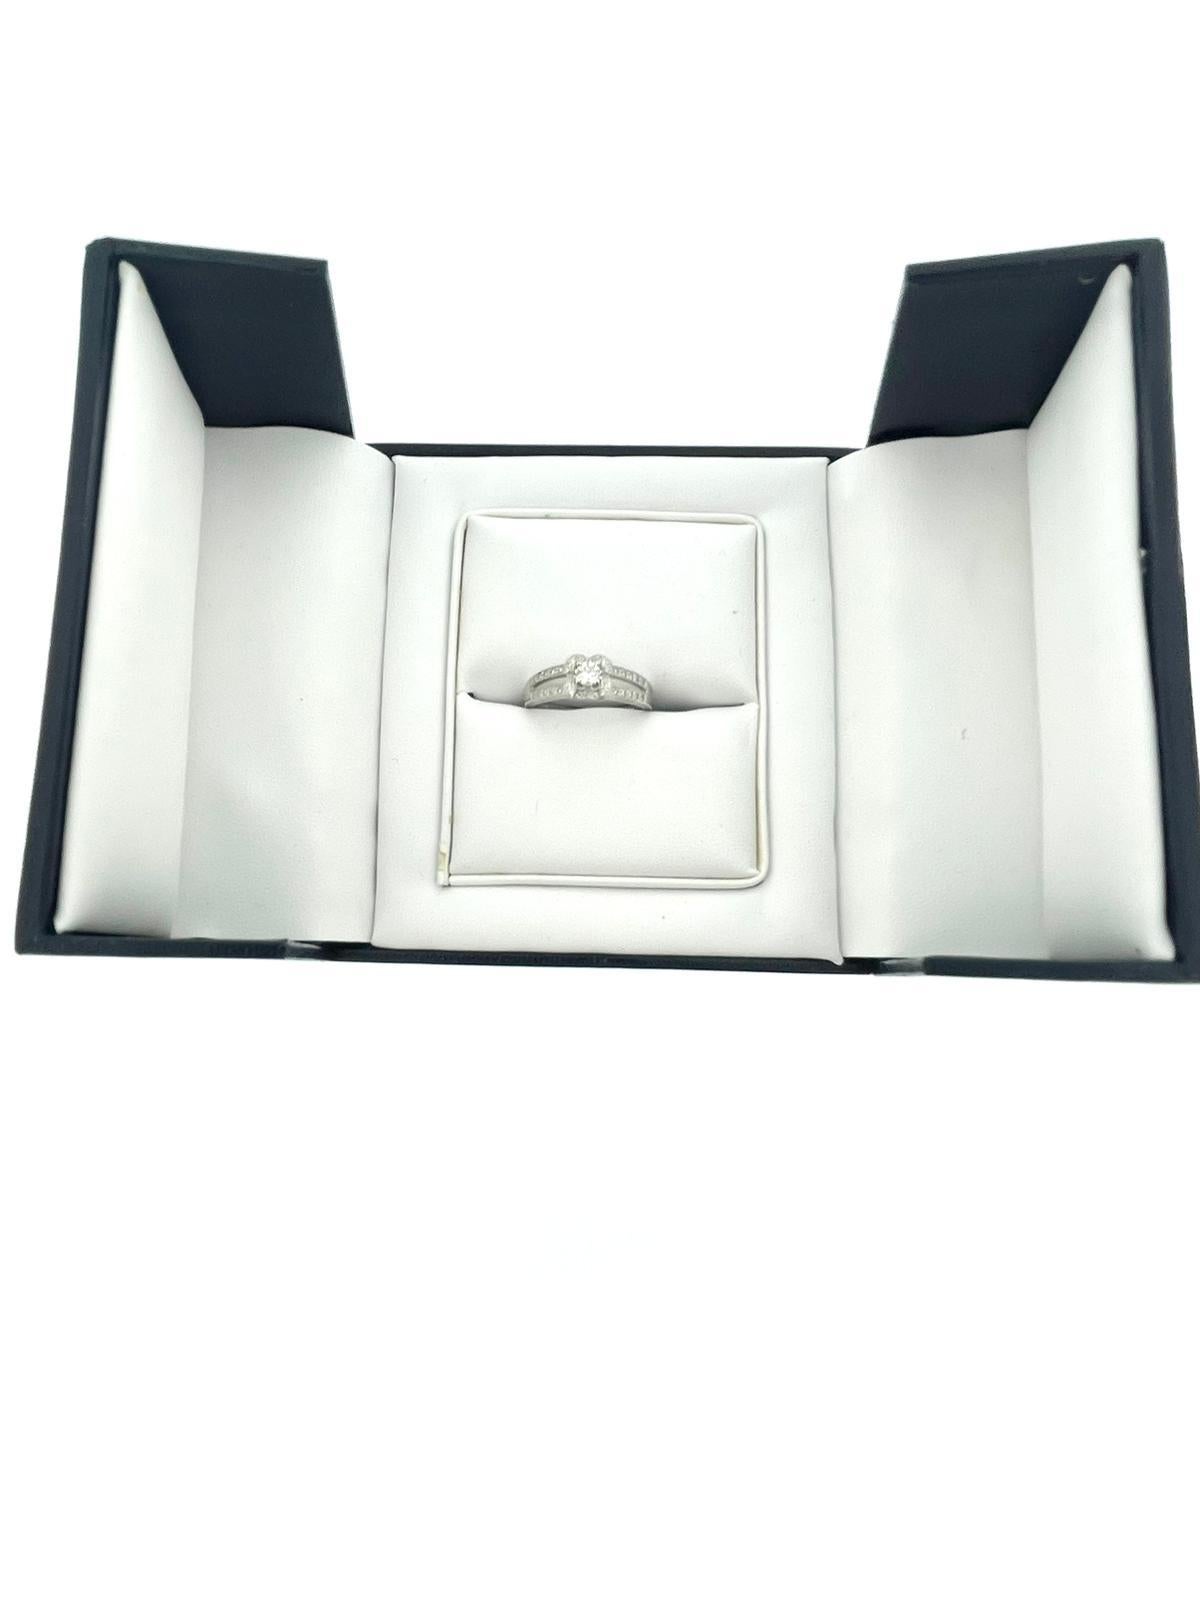 Women's Mauboussin Chance of Love N°2 White Gold Engagement Ring with Diamonds For Sale